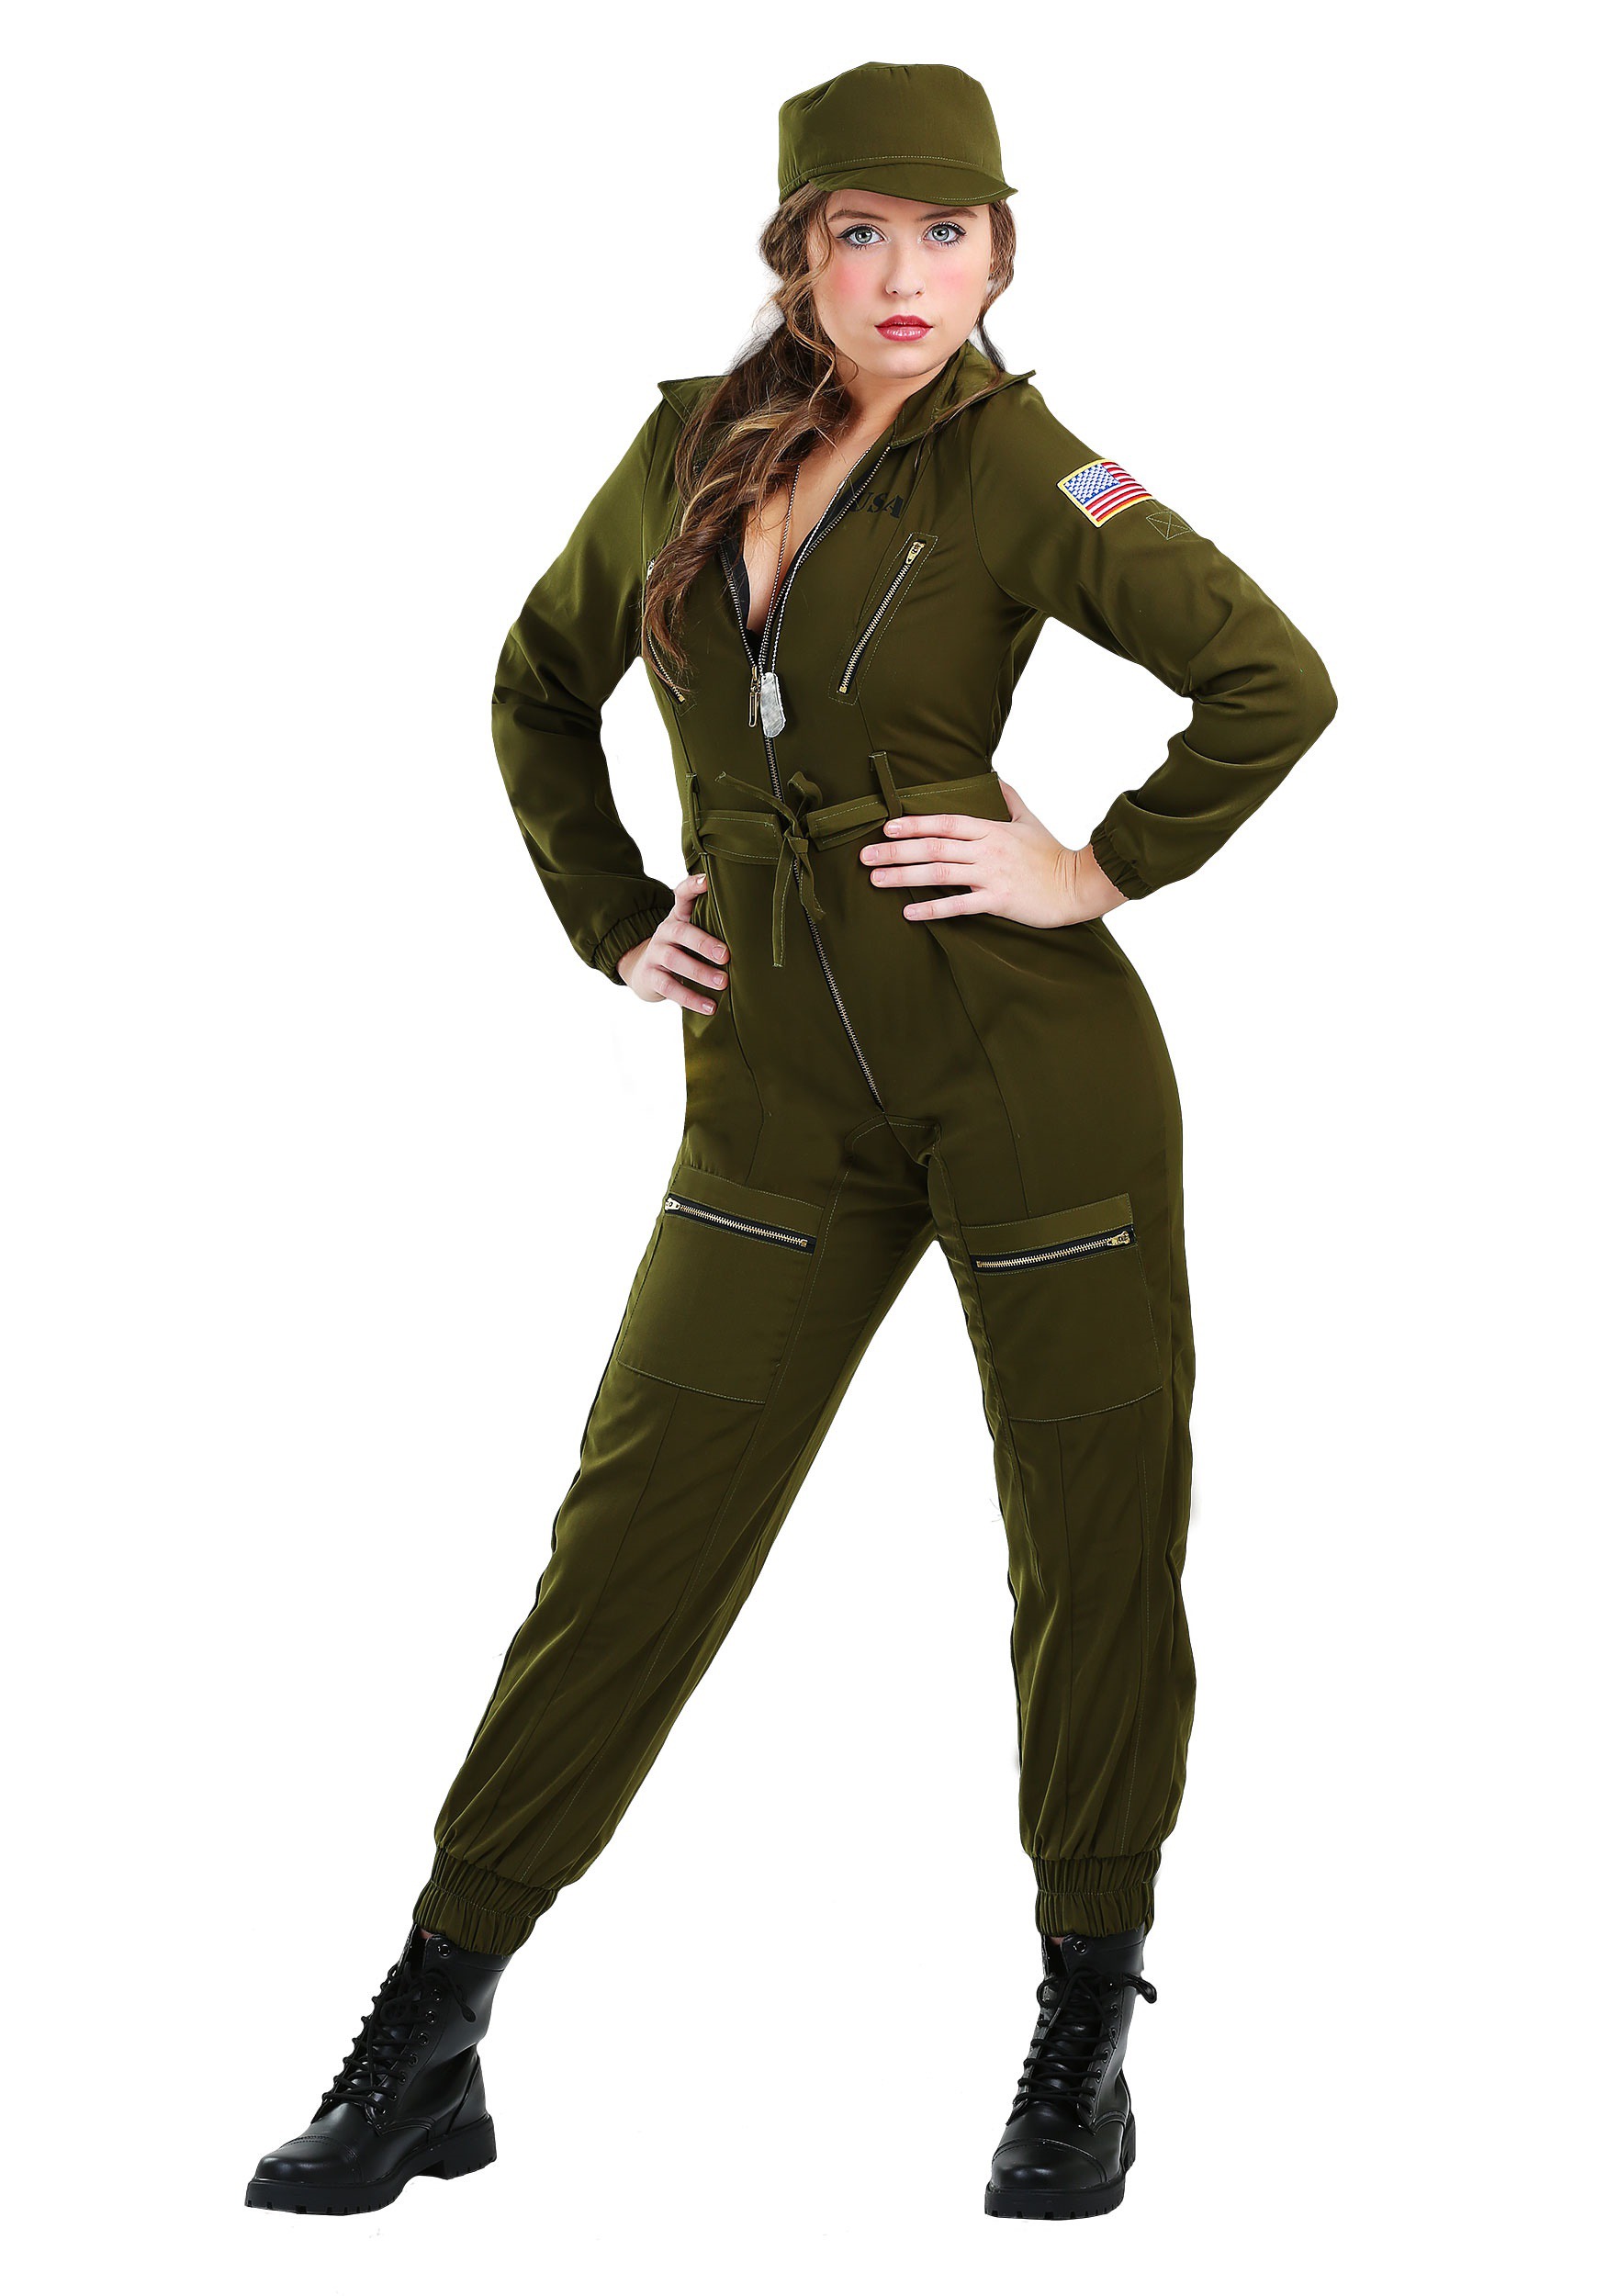 Army Flightsuit Costume For Women , Army Uniform Costumes